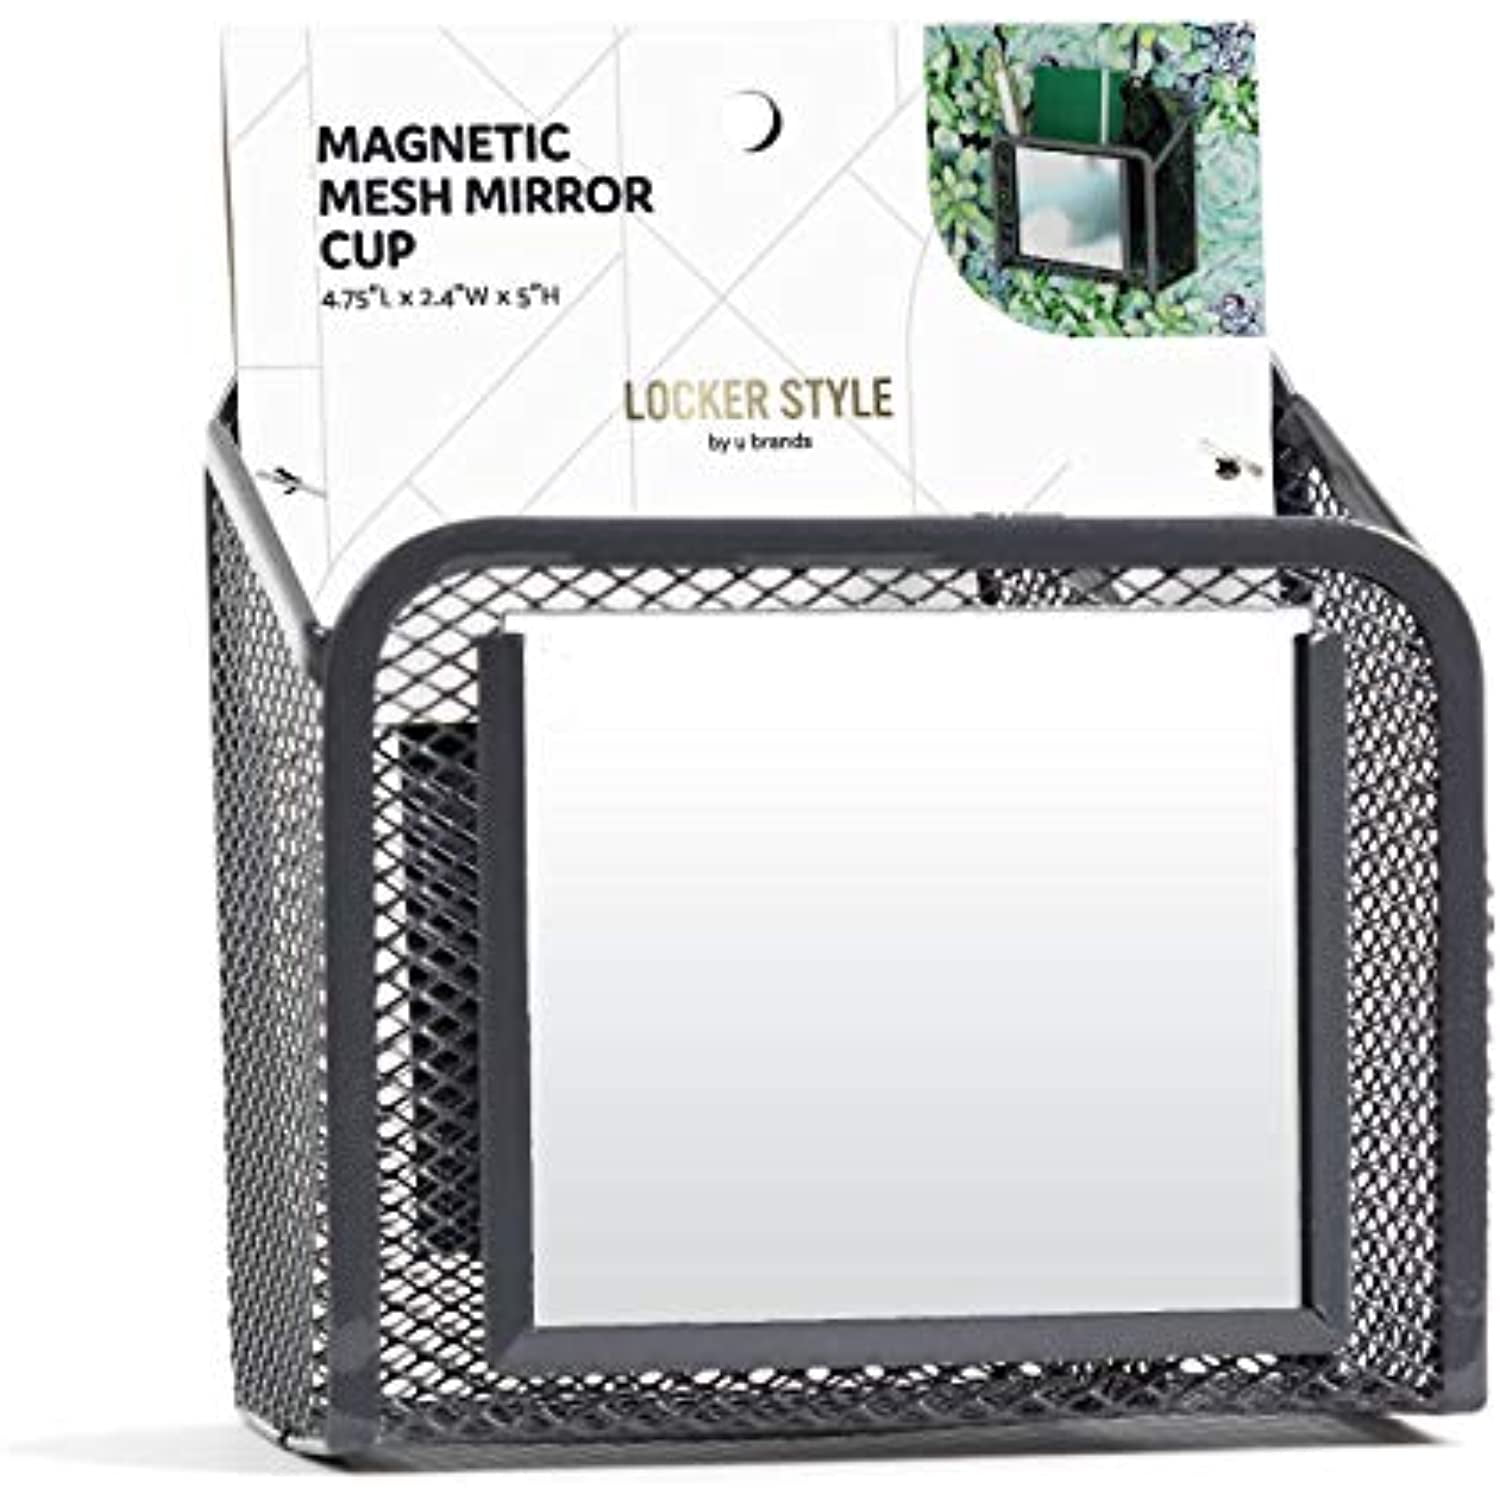 Locker Style Magnetic Mesh Mirror Stylish Utility Cup White 